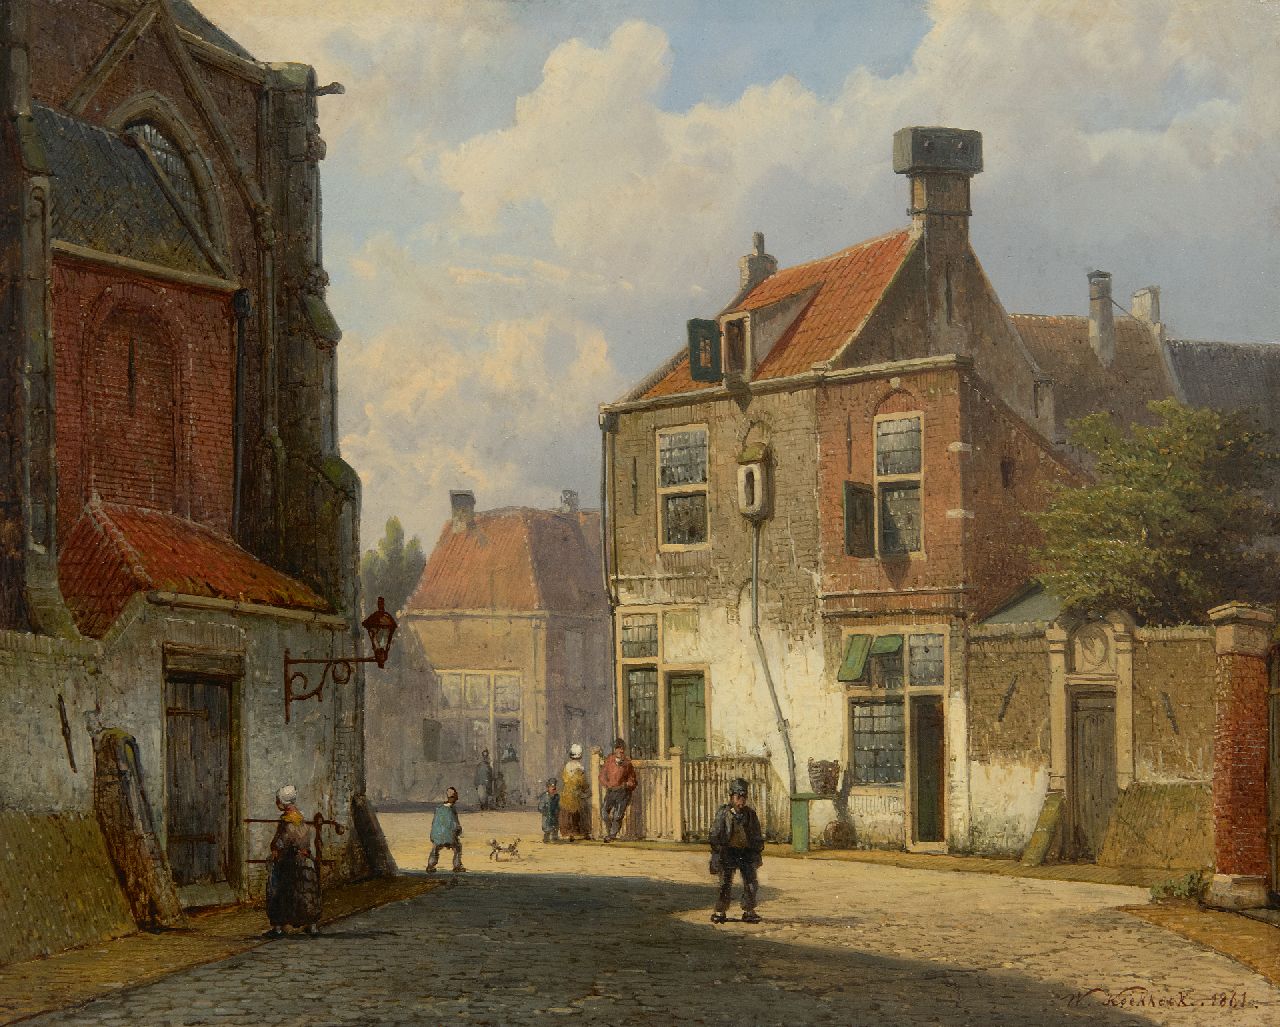 Koekkoek W.  | Willem Koekkoek | Paintings offered for sale | Sunny village street with figures, oil on panel 28.7 x 35.7 cm, signed l.r. and dated 1861